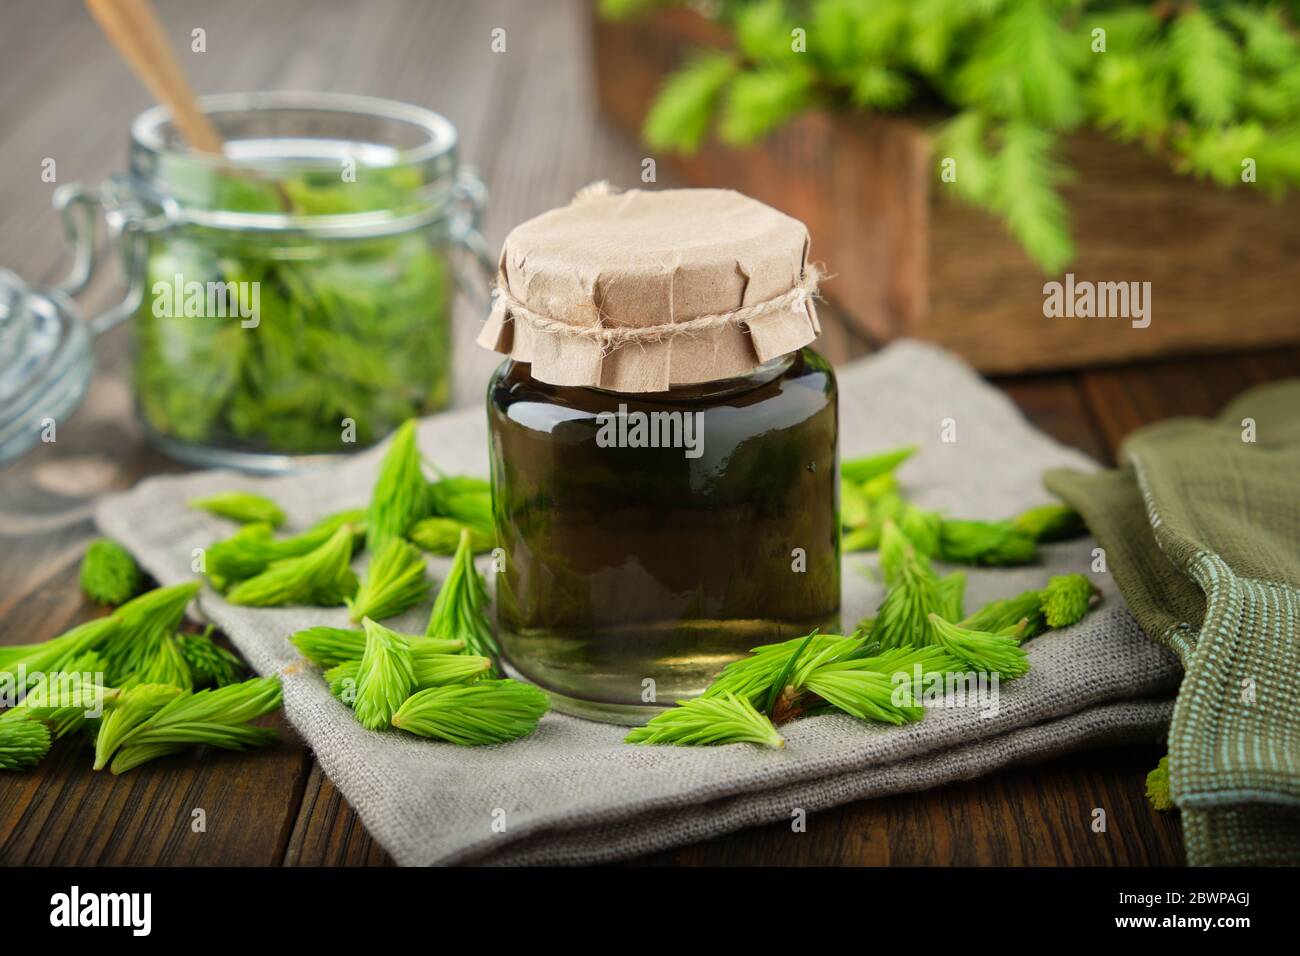 Bottle of infusion, liquid chlorophyll or drink from fir buds and needles, jar of spruce tips and wooden crate of fir tree twigs. Stock Photo